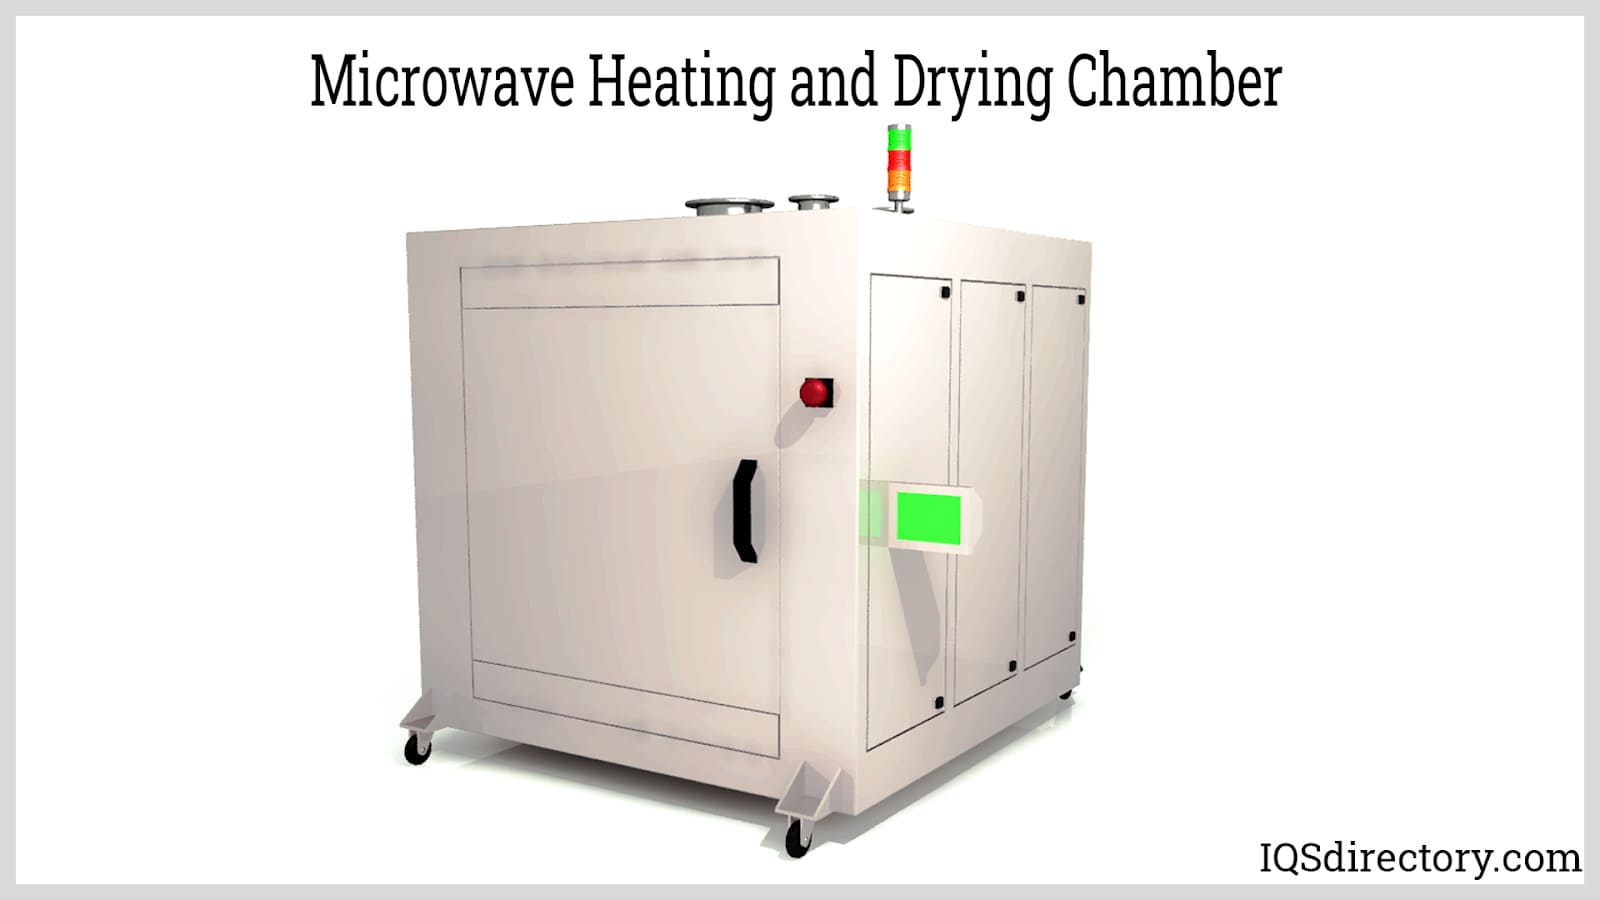 https://www.iqsdirectory.com/articles/industrial-oven/microwave-heating-and-drying-chamber.jpg